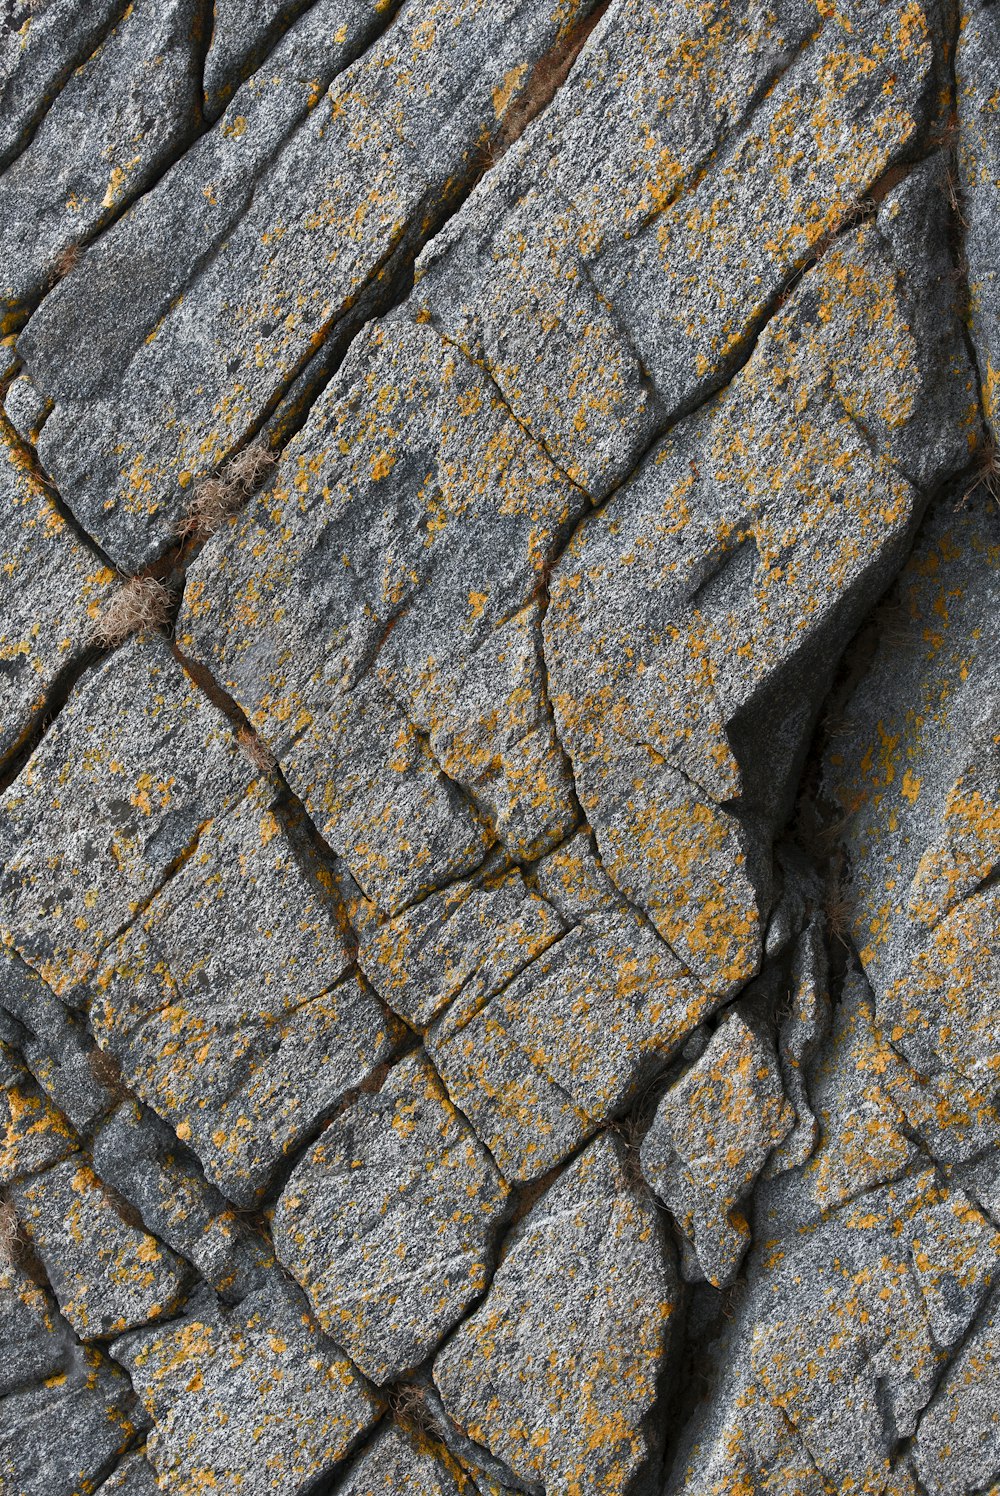 a close up of rocks with yellow lichen on them